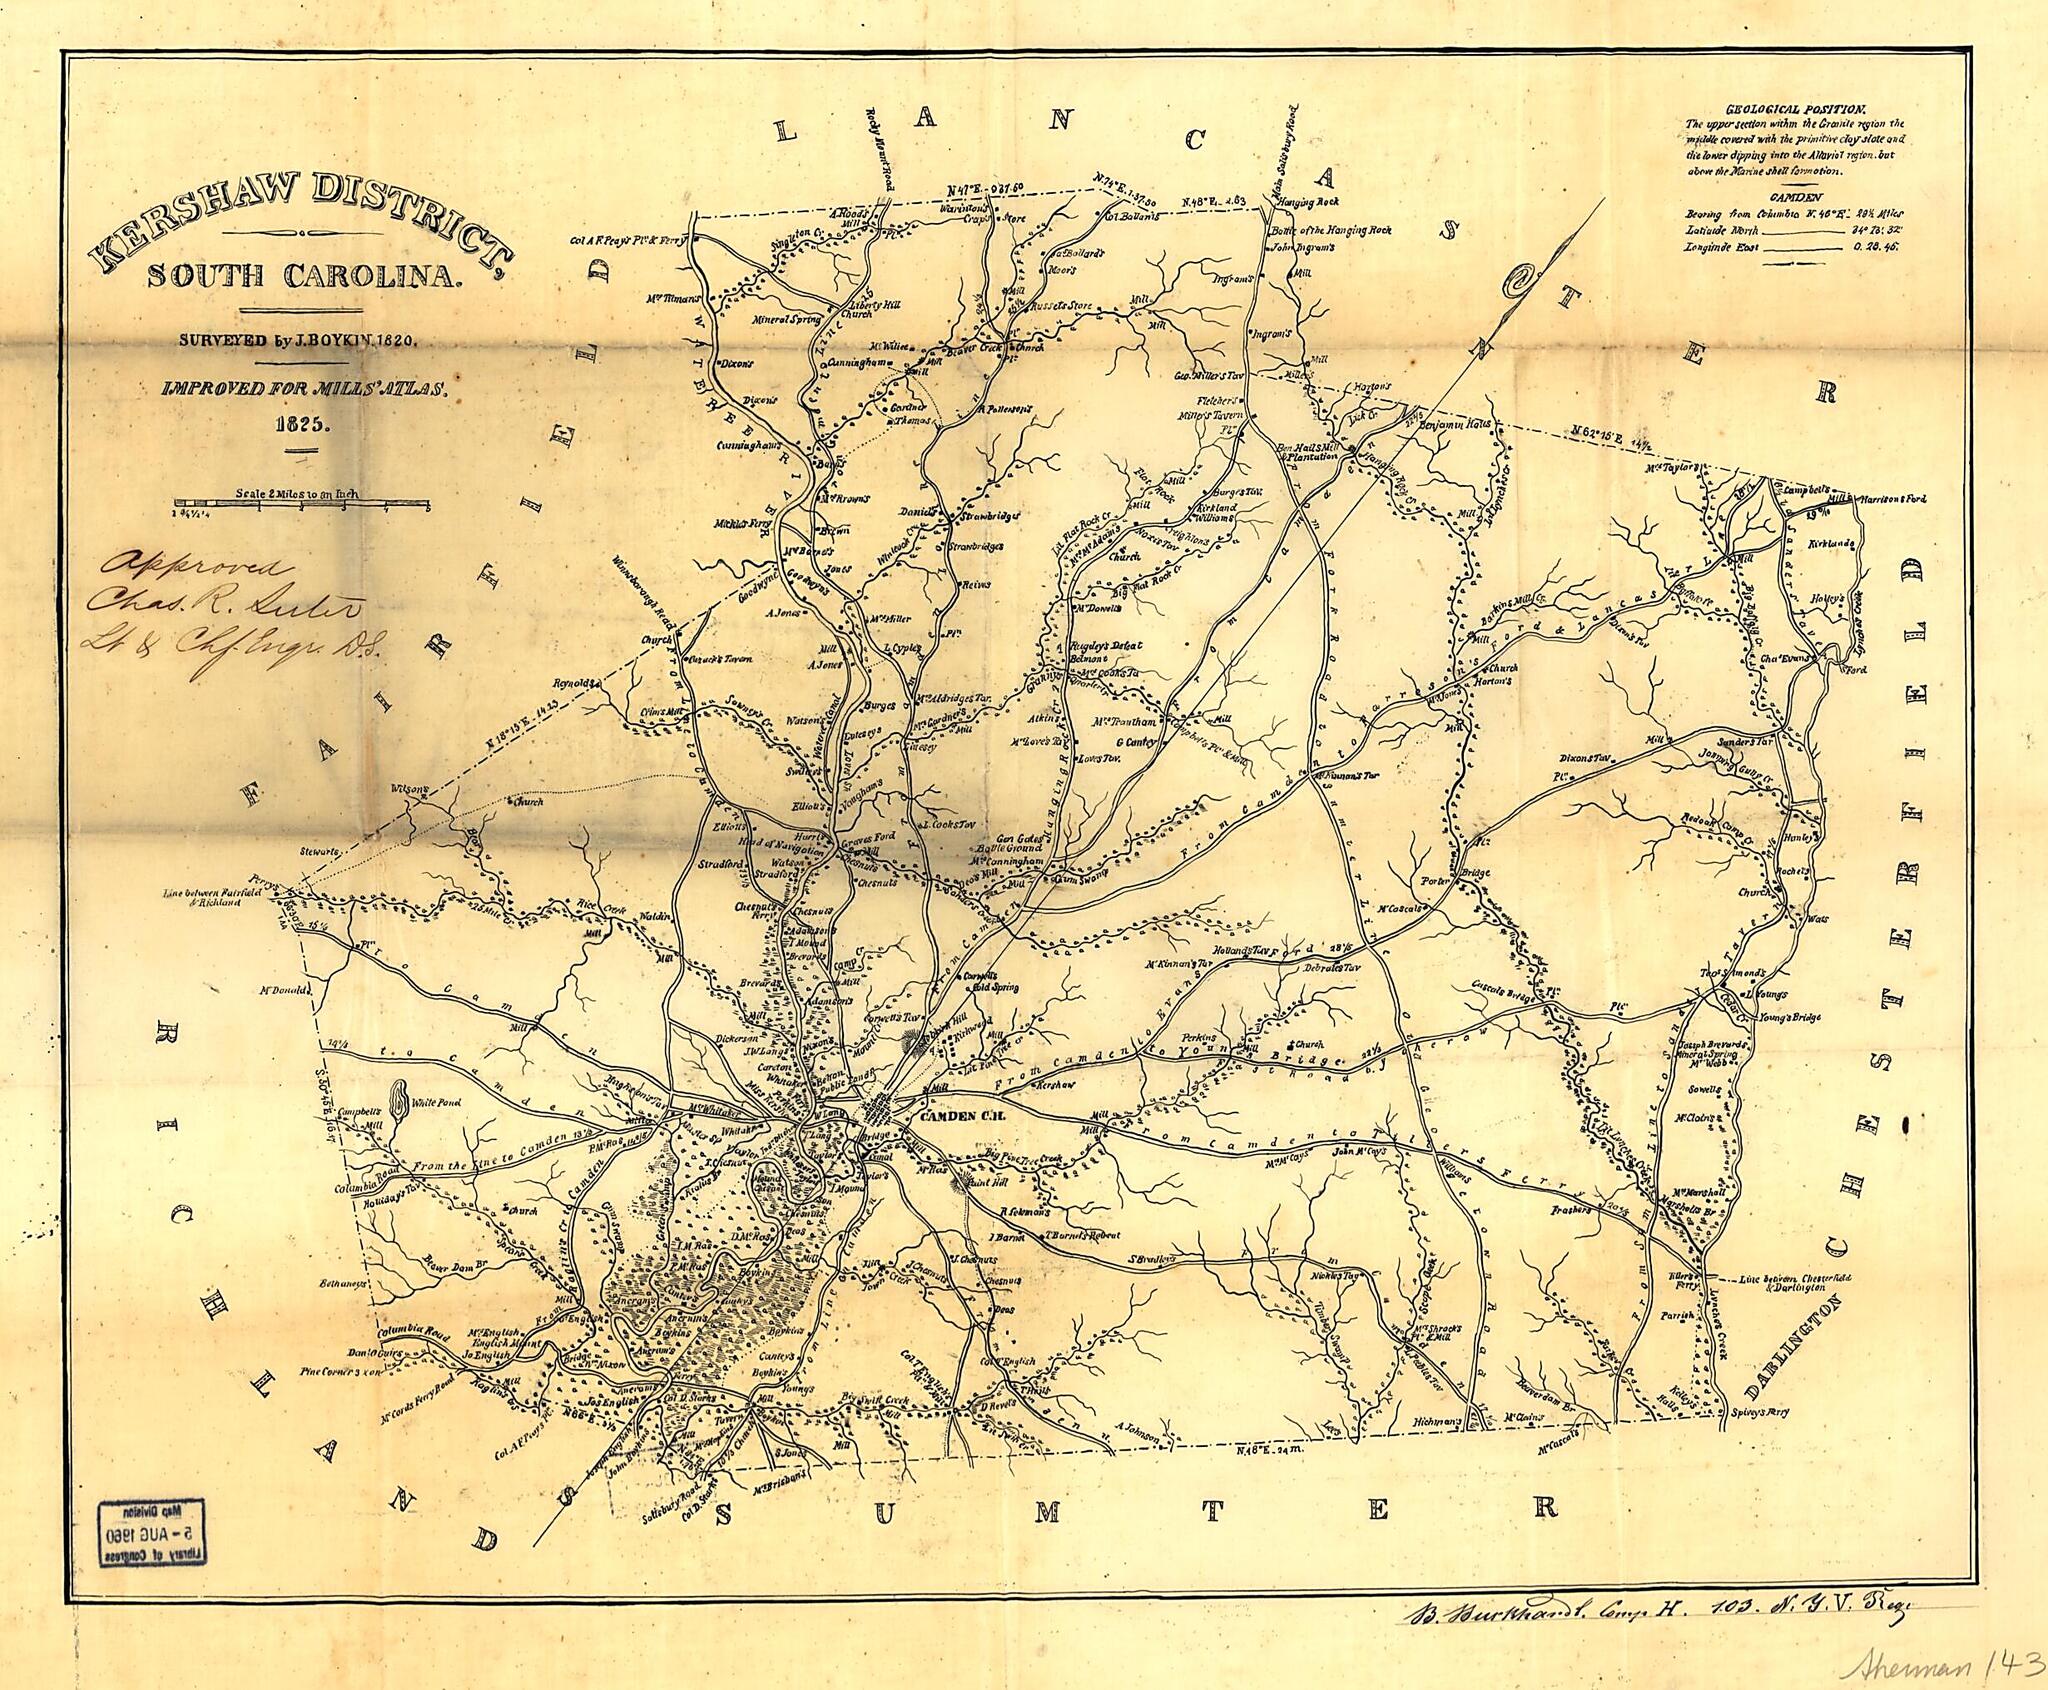 This old map of Kershaw District, South Carolina from 1825 was created by J. Boykin, Robert Mills in 1825